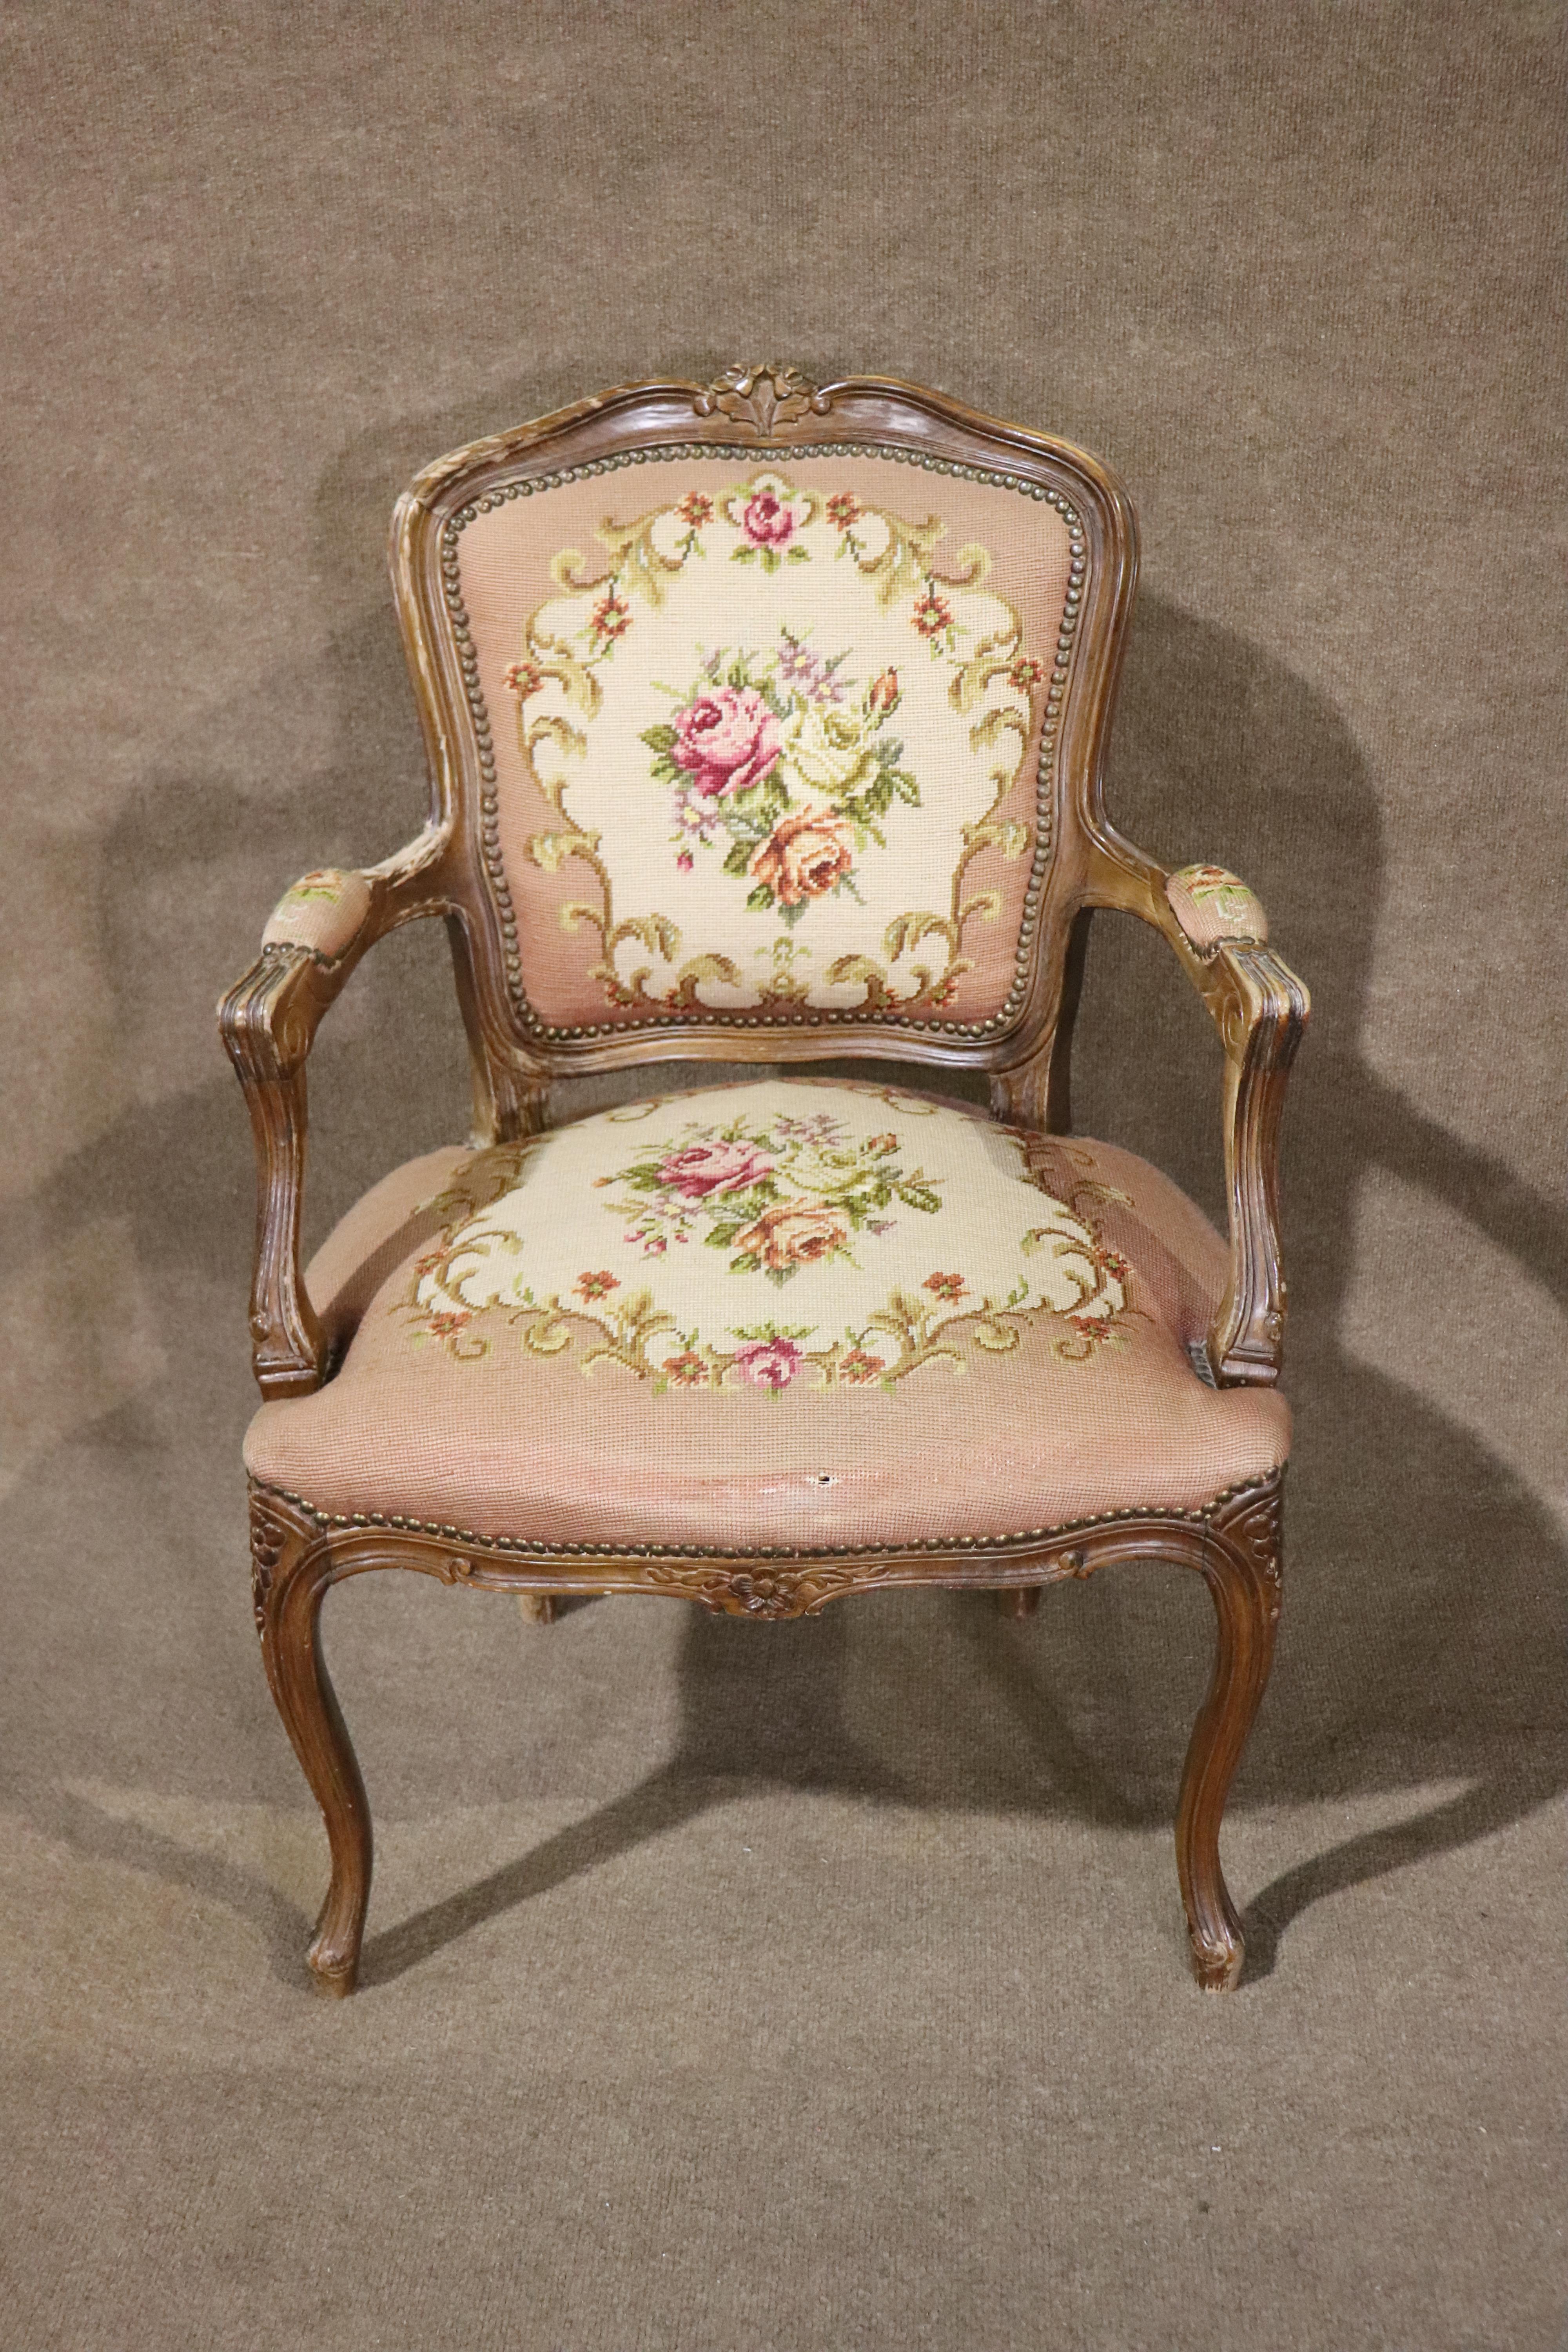 Antique side chair with beautiful needlepoint design on seat, back and arms. Hand carved frame with decorative design and nail head trim.
Please confirm location NY or NJ 